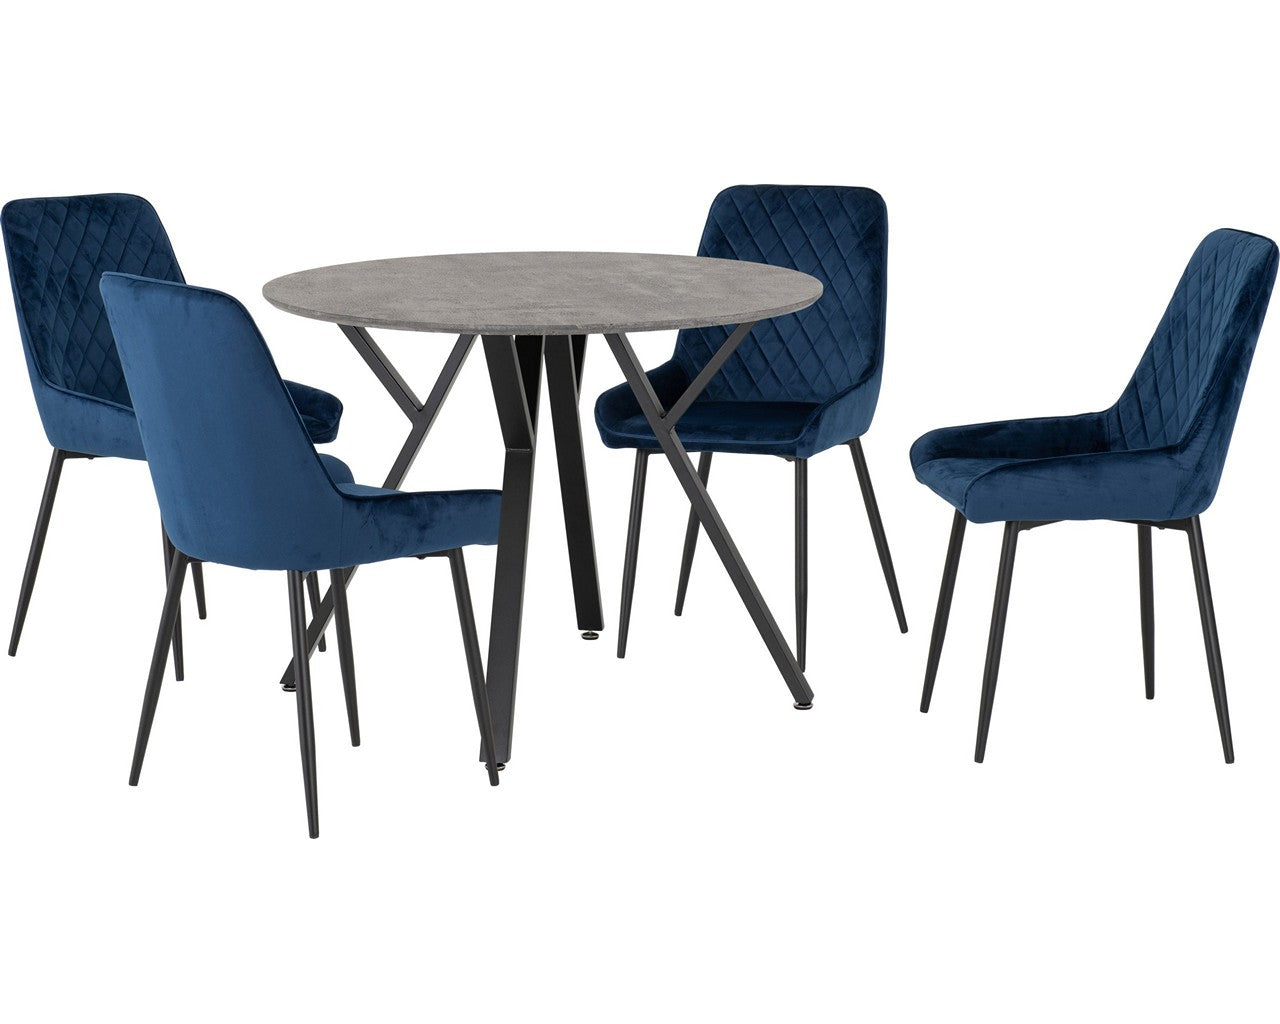 athens-round-dining-set-avery-chairs - 3